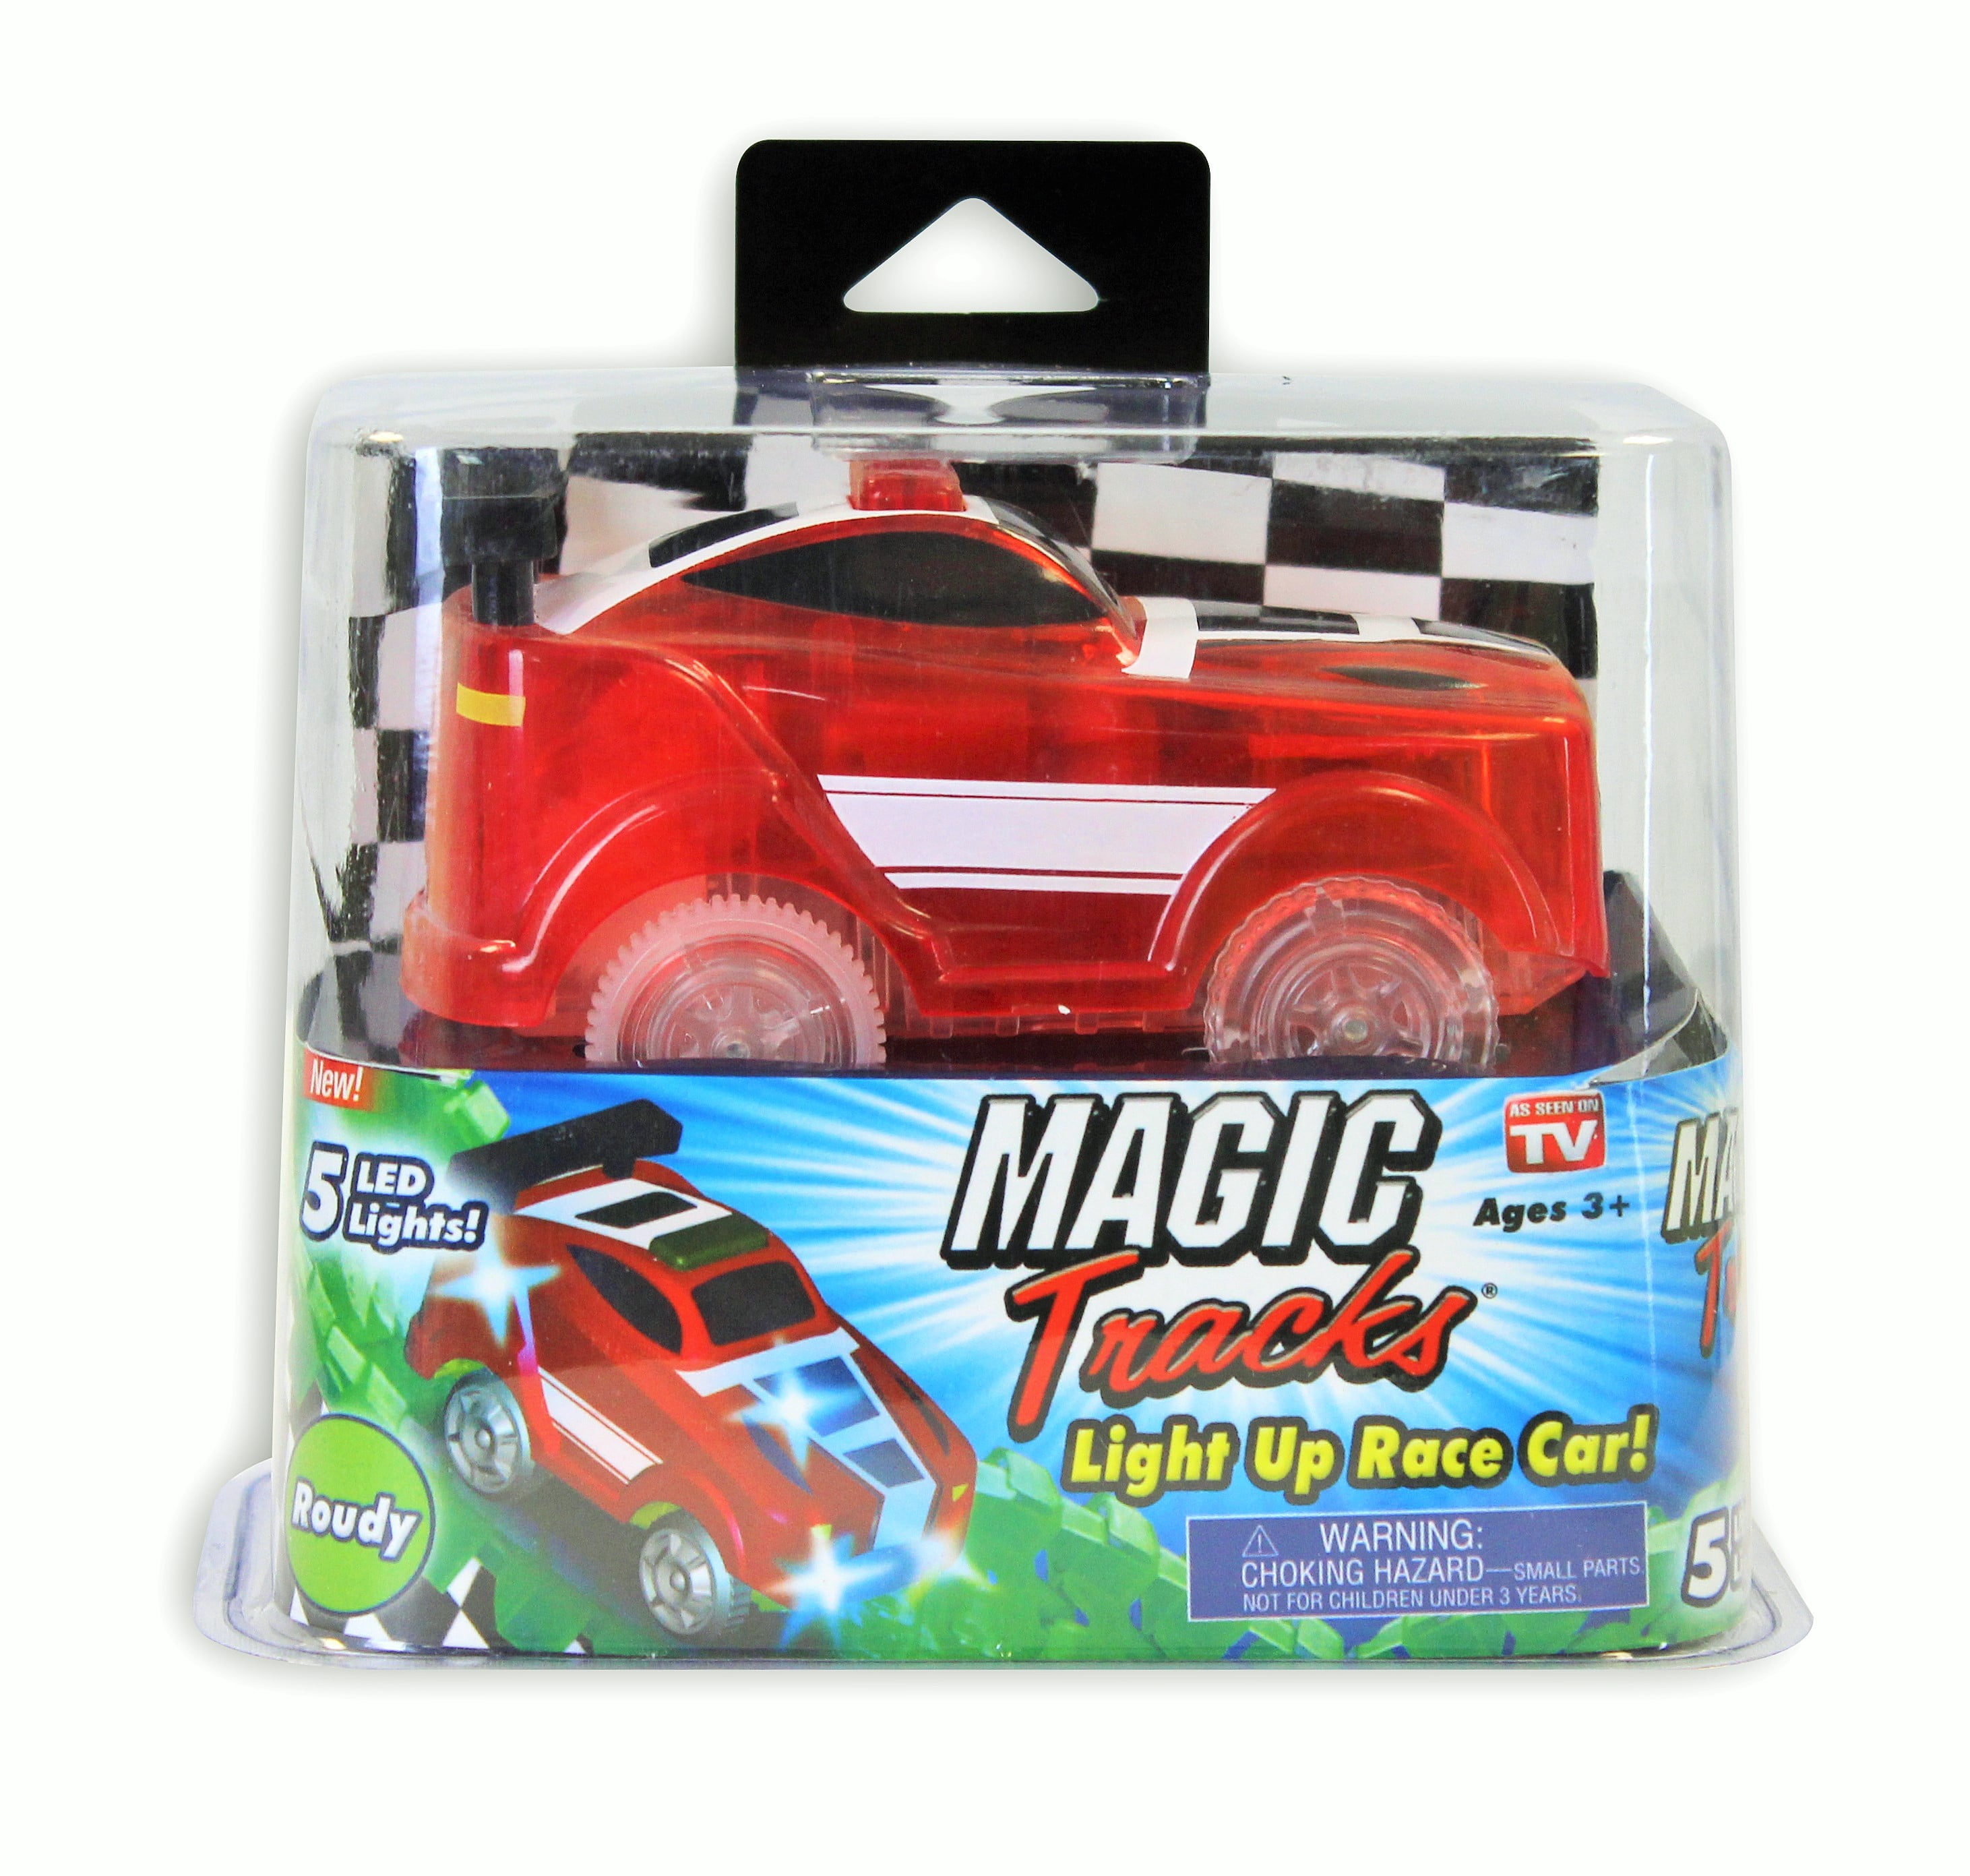 FAST FREE SHIPPING!1 Magic Tracks Light-Up Car & Remote Green Racer 